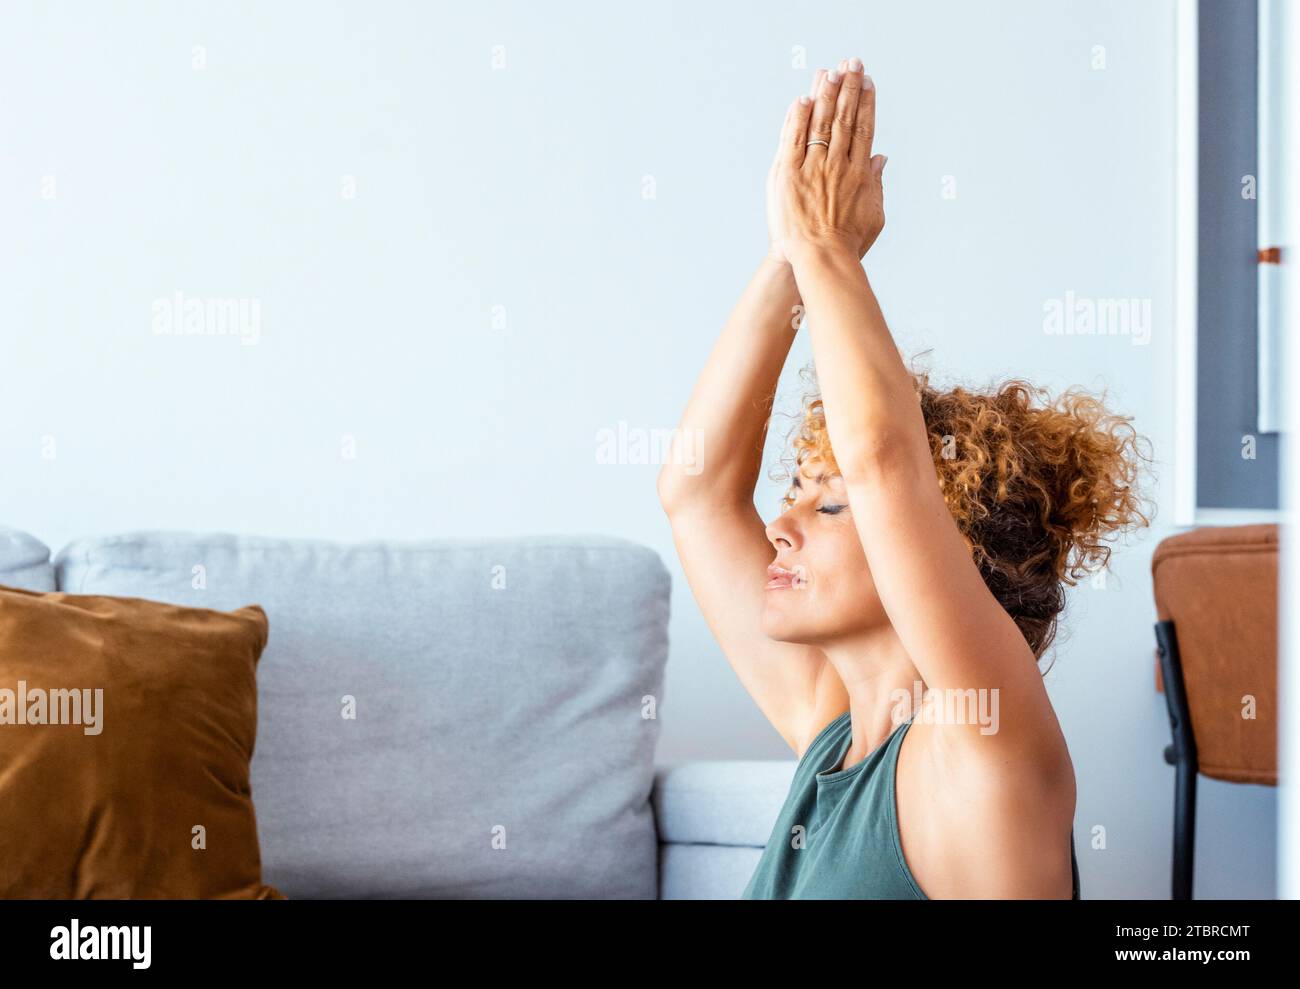 One young adult woman doing yoga exercises at home alone in living room. Healthy workout pilates lifestyle people in indoor sport activity. Wellbeing and interior mental balance mindful female mature Stock Photo